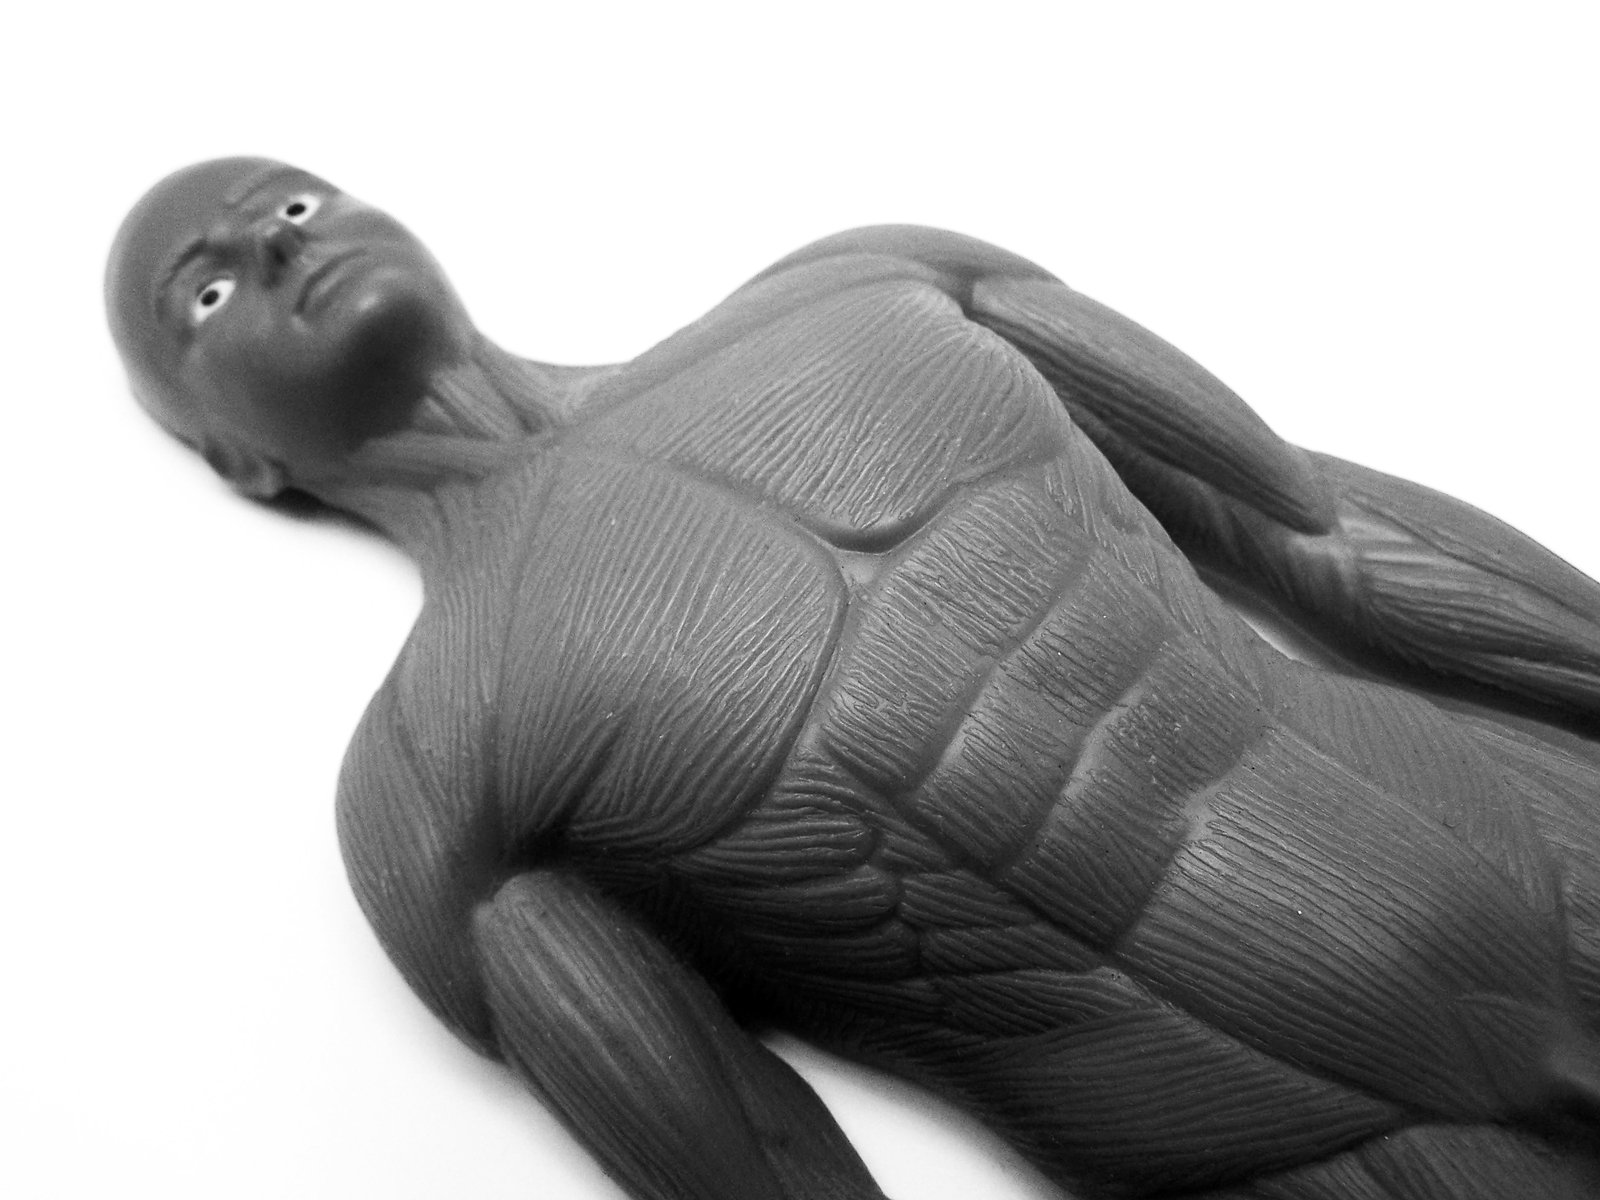 the body model of a person lying down